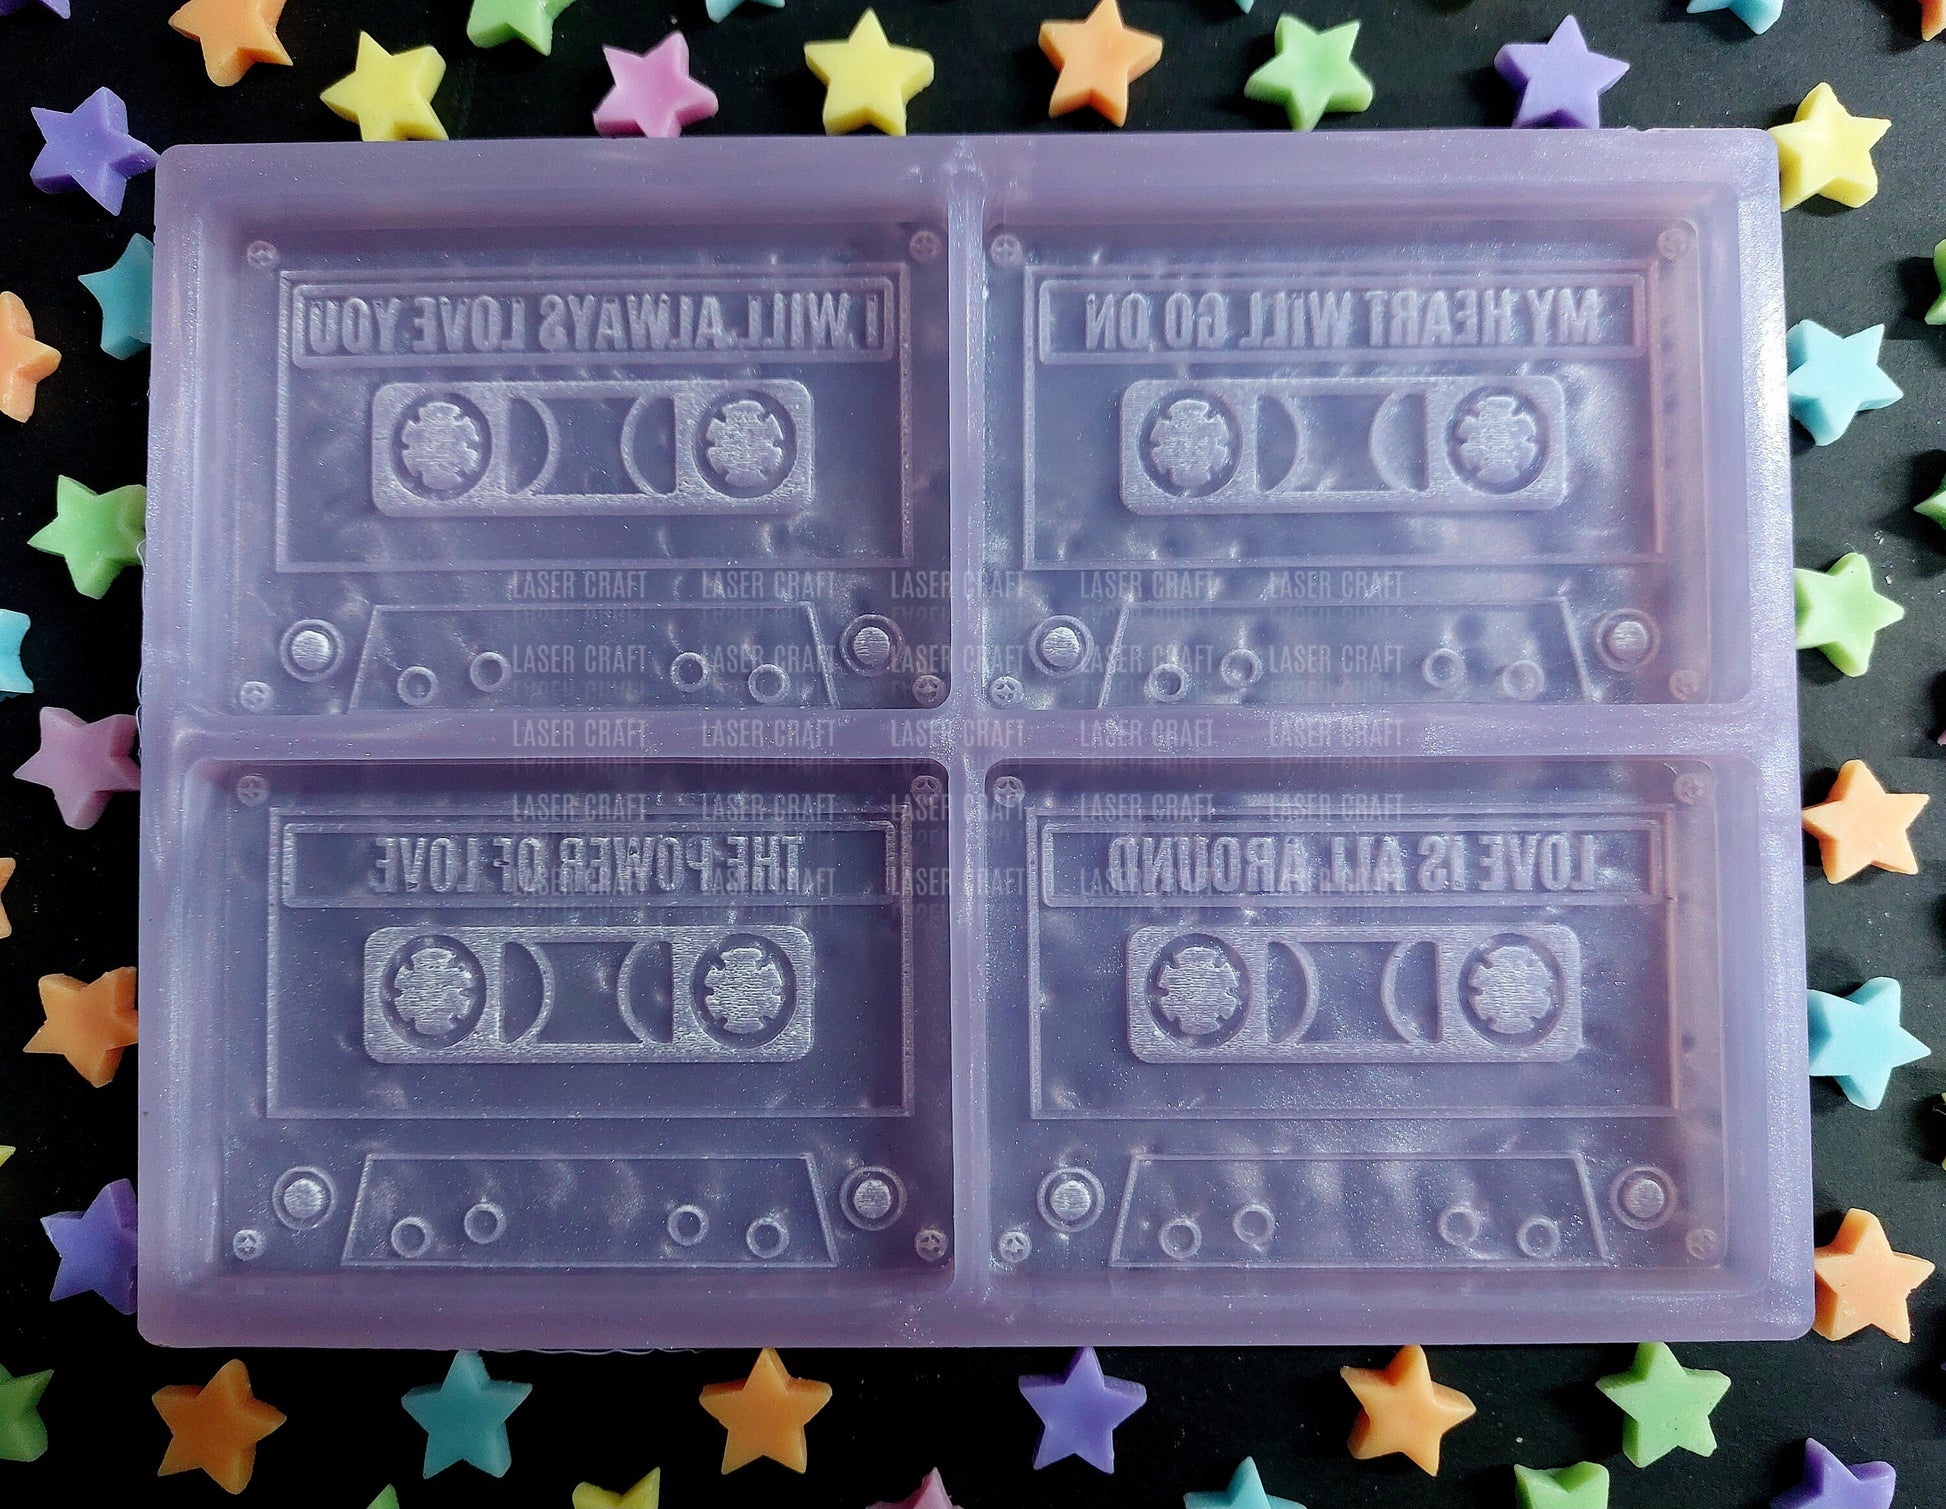 Valentines/Love Songs Cassette Tape Mould for wax, resin, soap etc